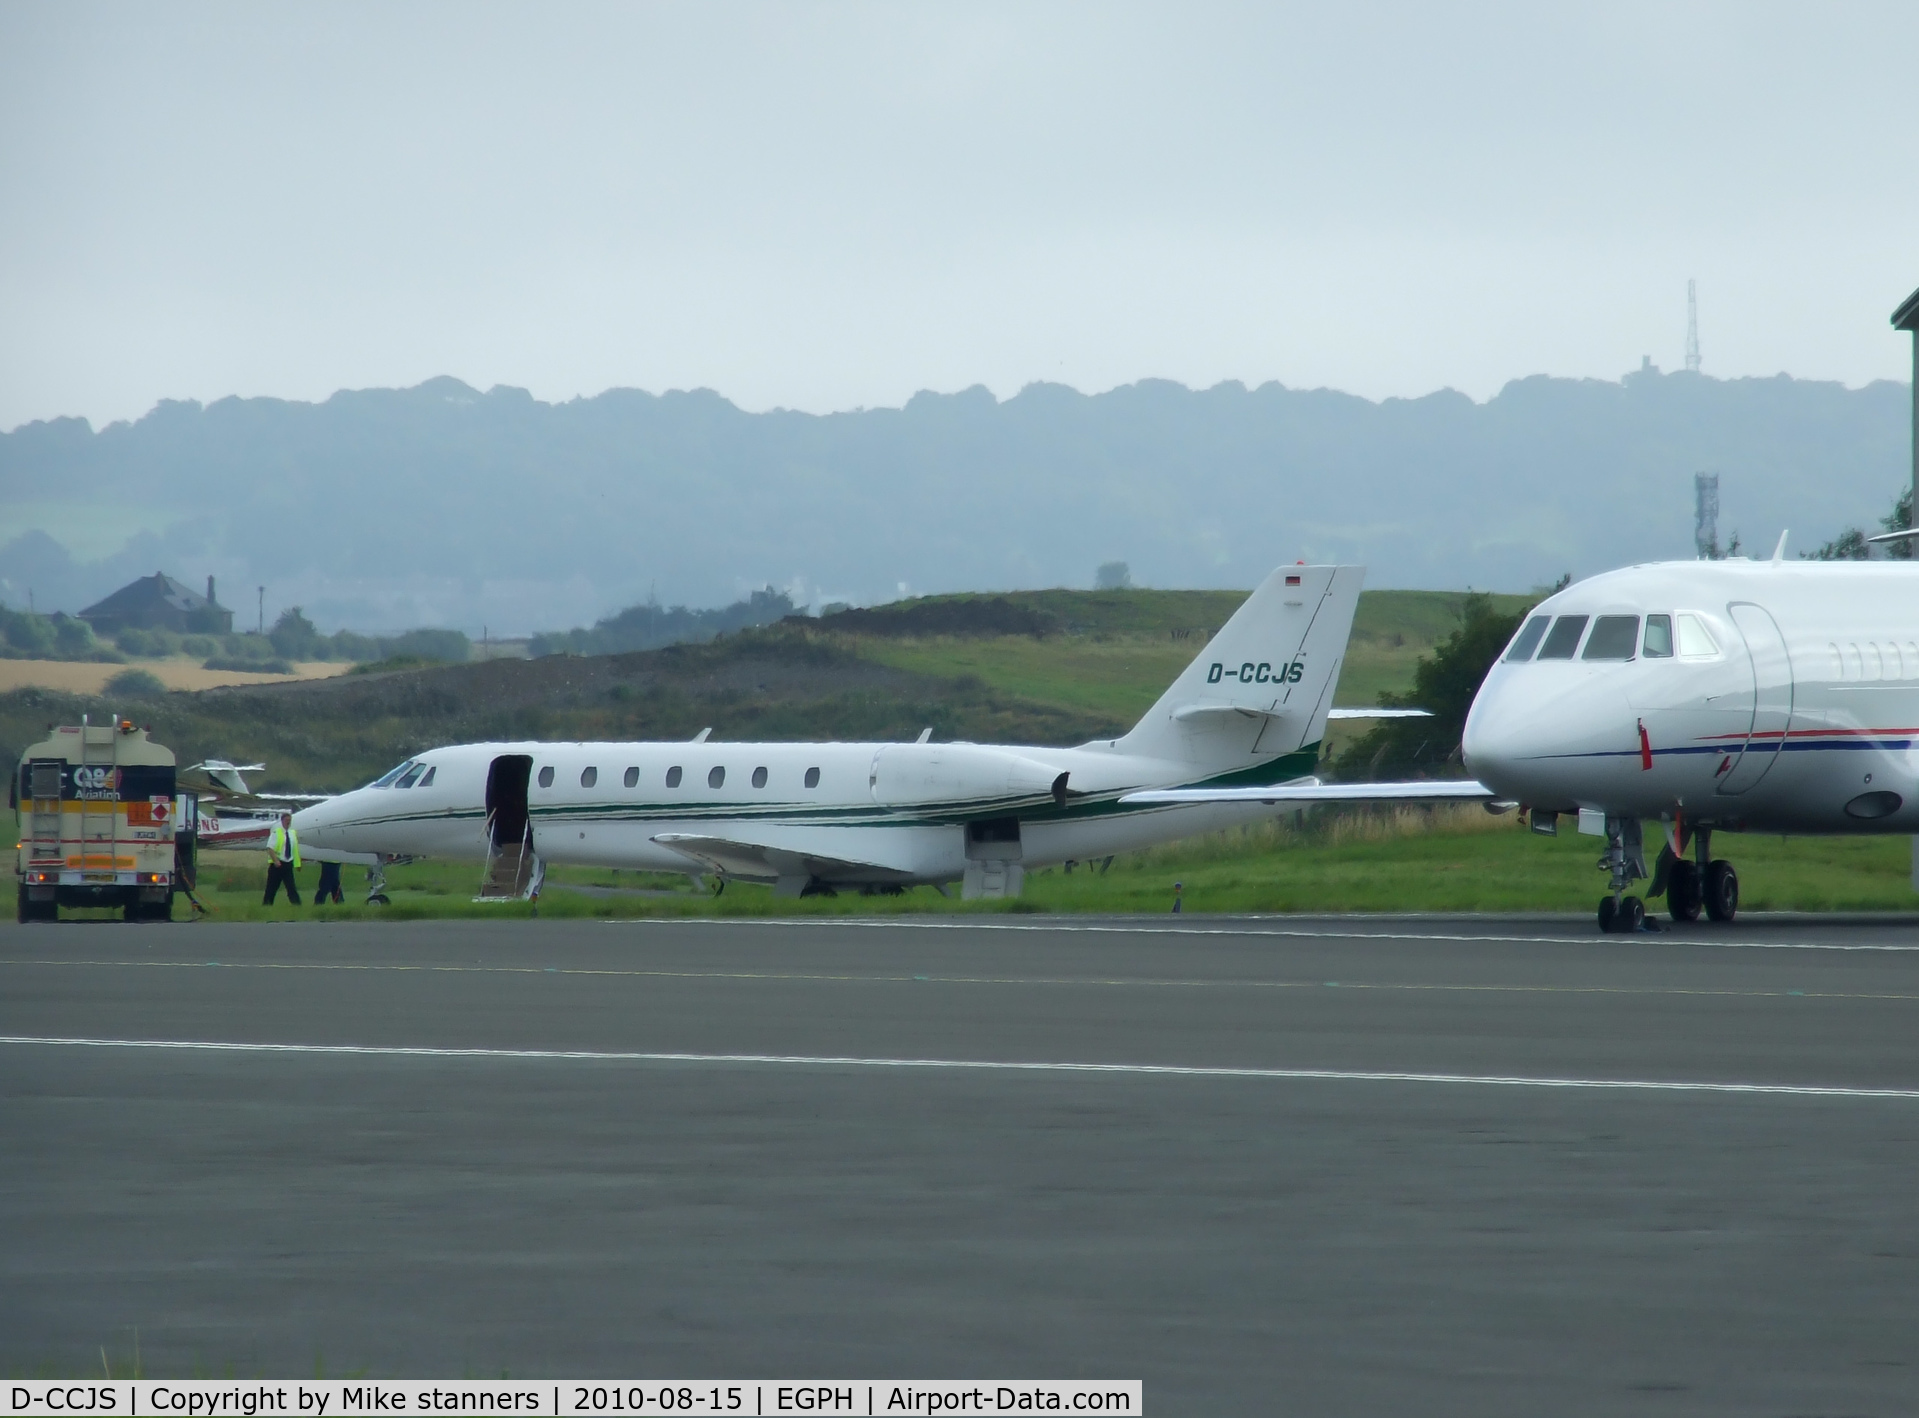 D-CCJS, 2007 Cessna 680 Citation Sovereign C/N 680-0175, VHM Schul und charterflug citation sovereign seen at the General aviation terminal being readied for departure